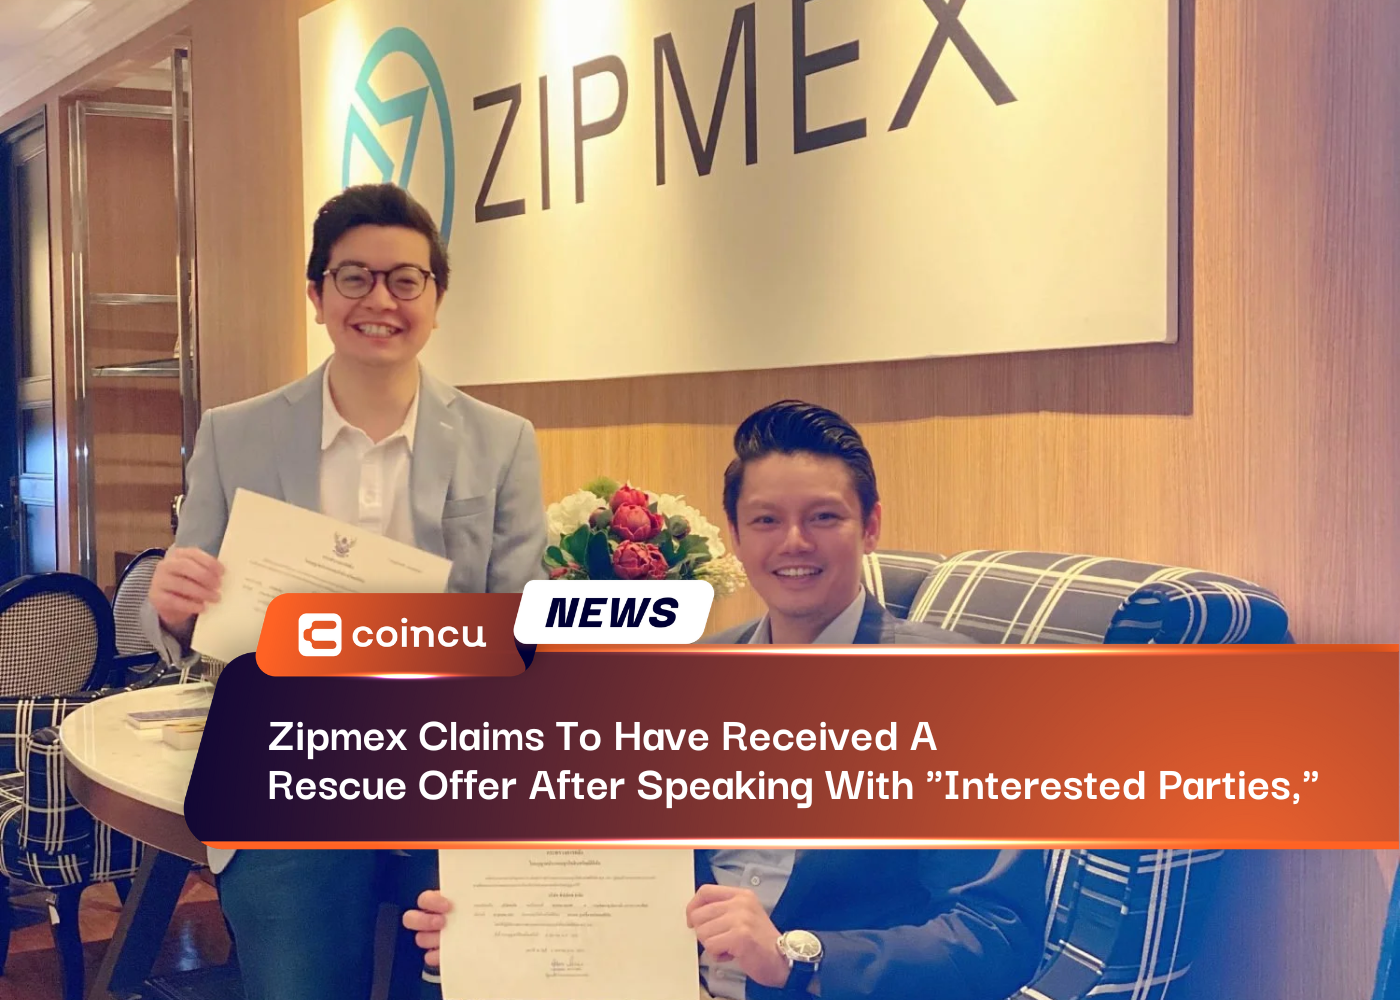 Zipmex Claims To Have Received A Rescue Offer After Speaking With "Interested Parties,"